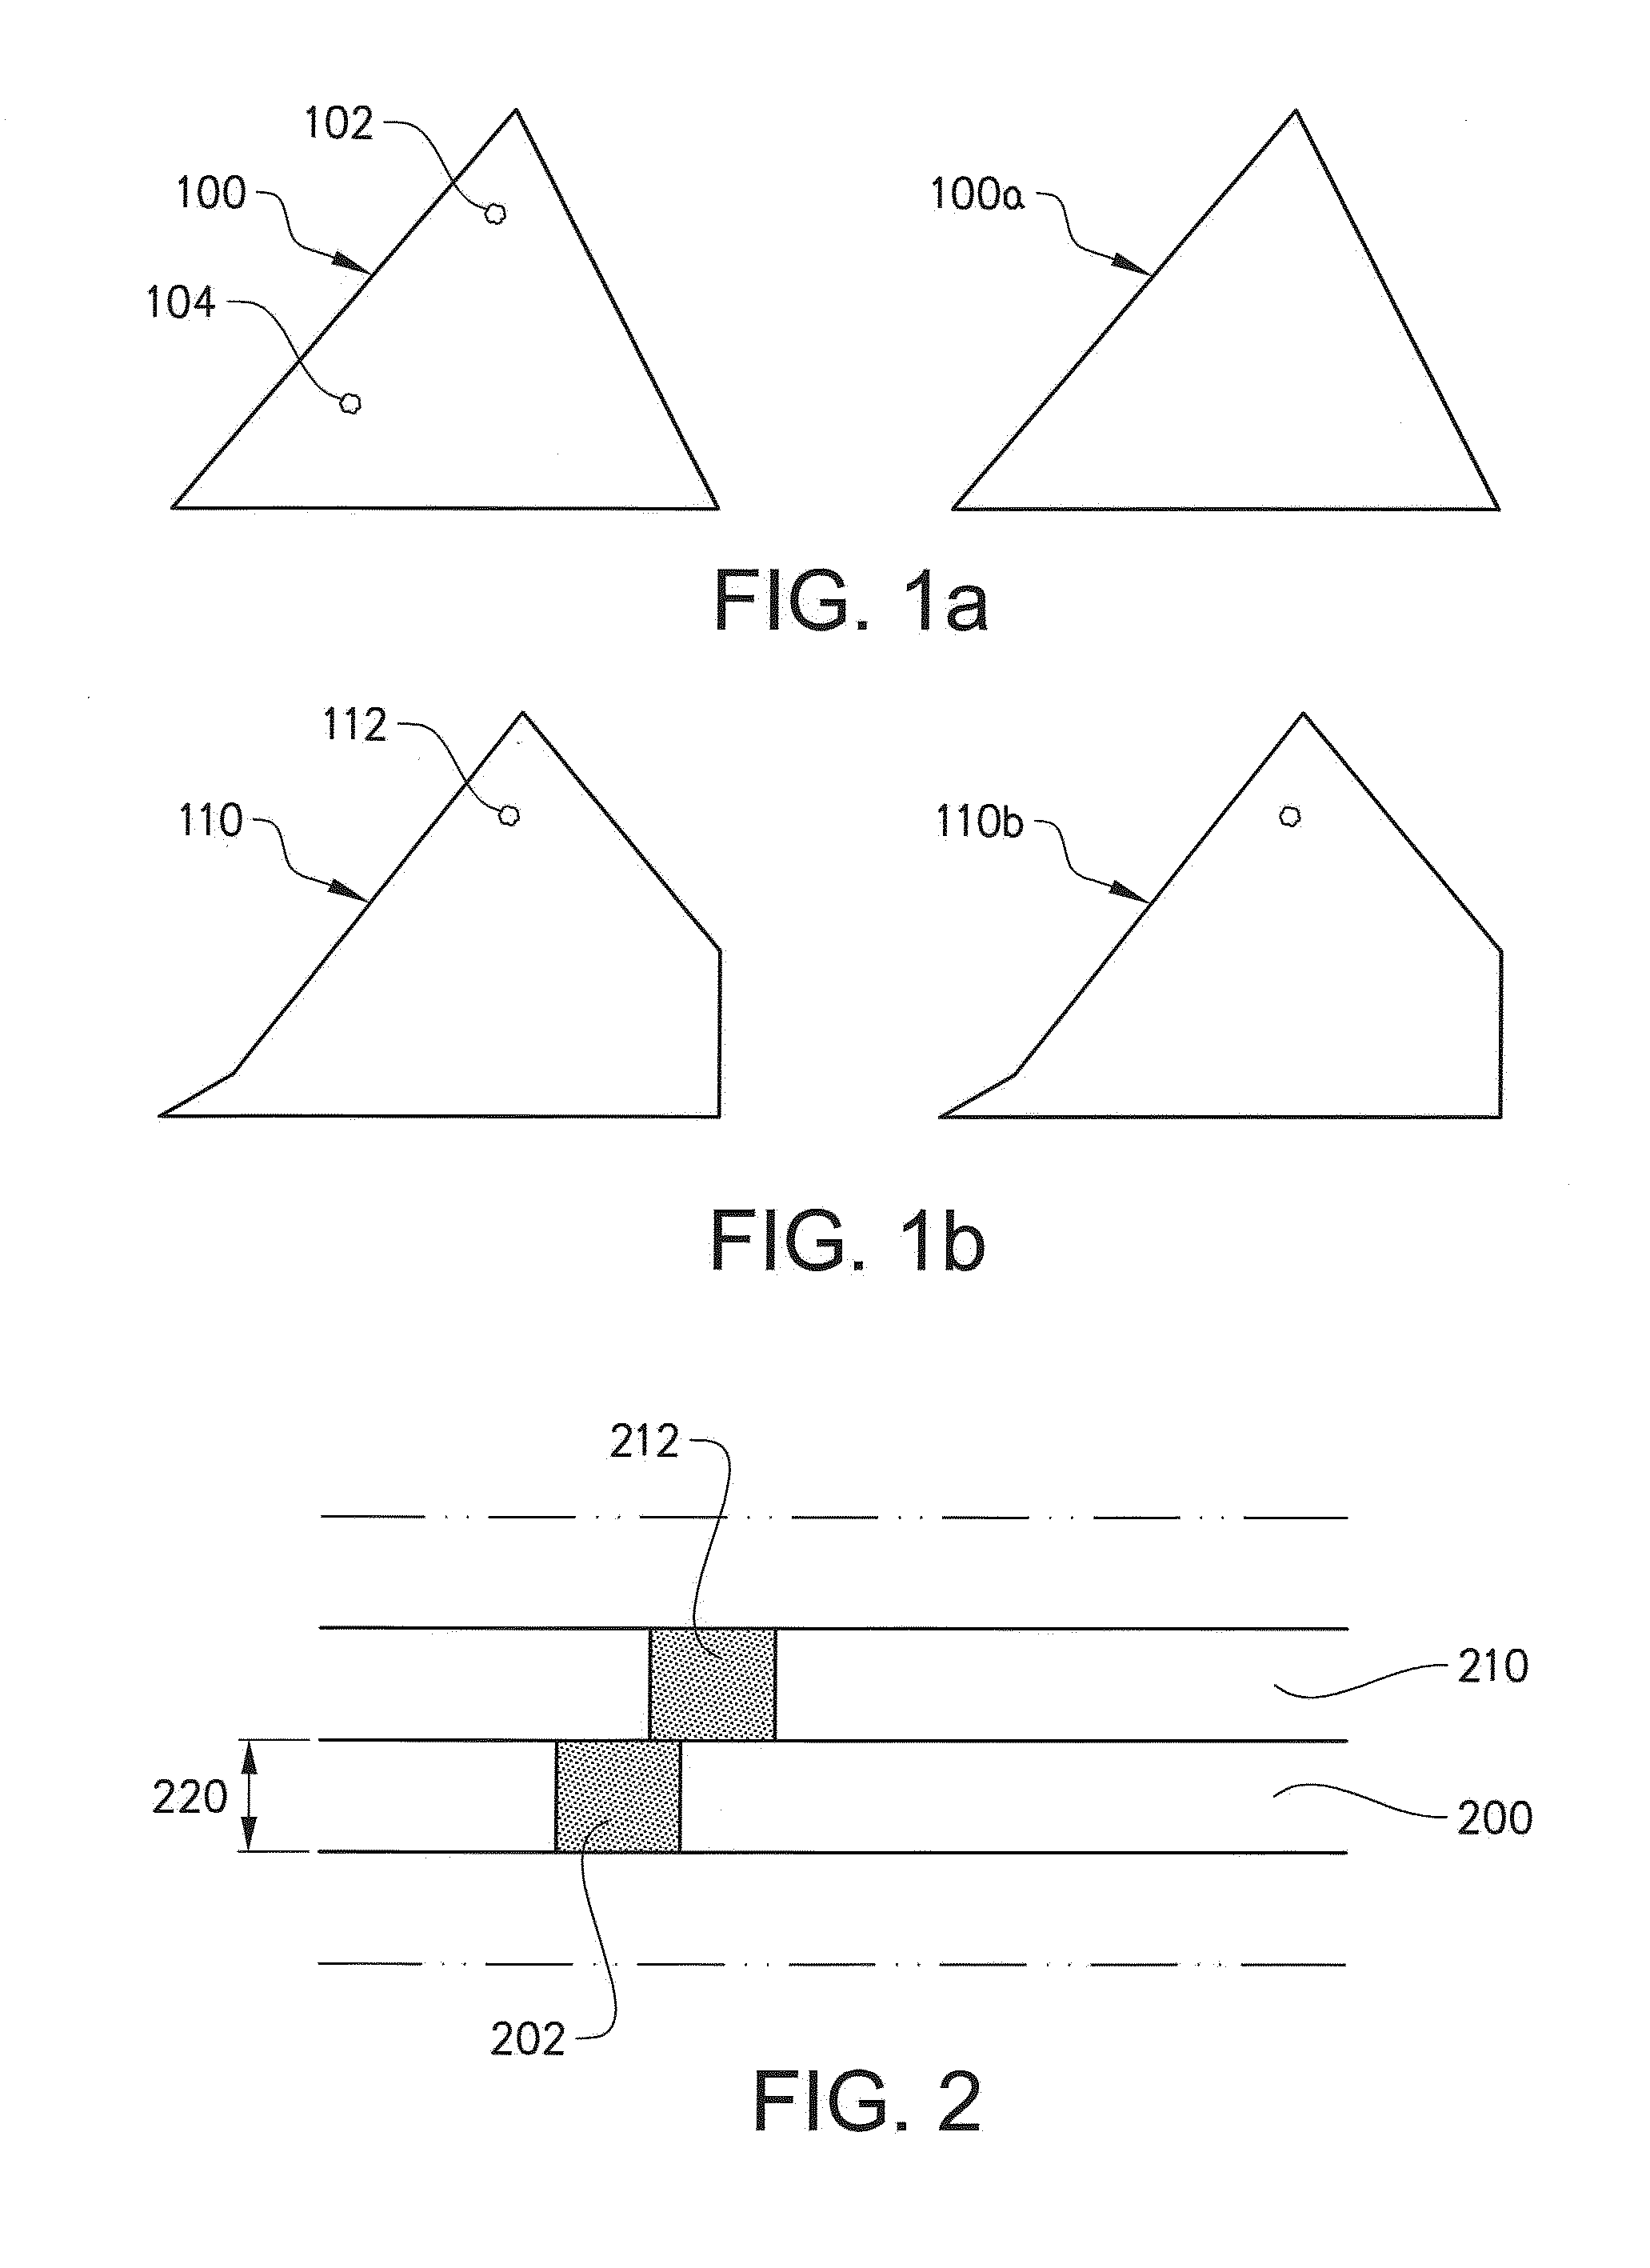 Method and apparatus for detecting defects in freeform fabrication